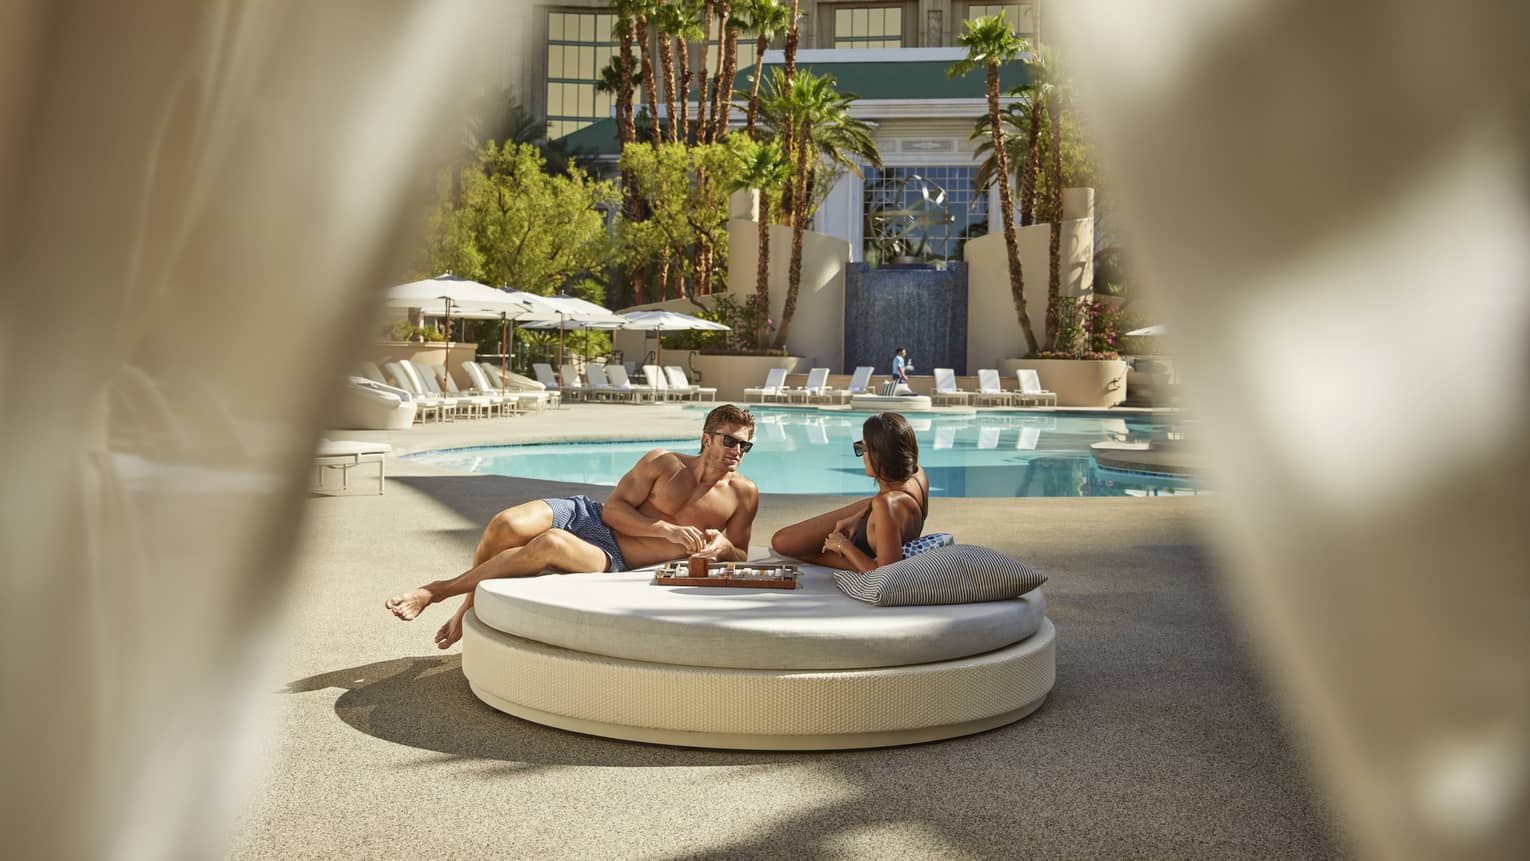 A man and woman lounging on a round daybed by a pool.